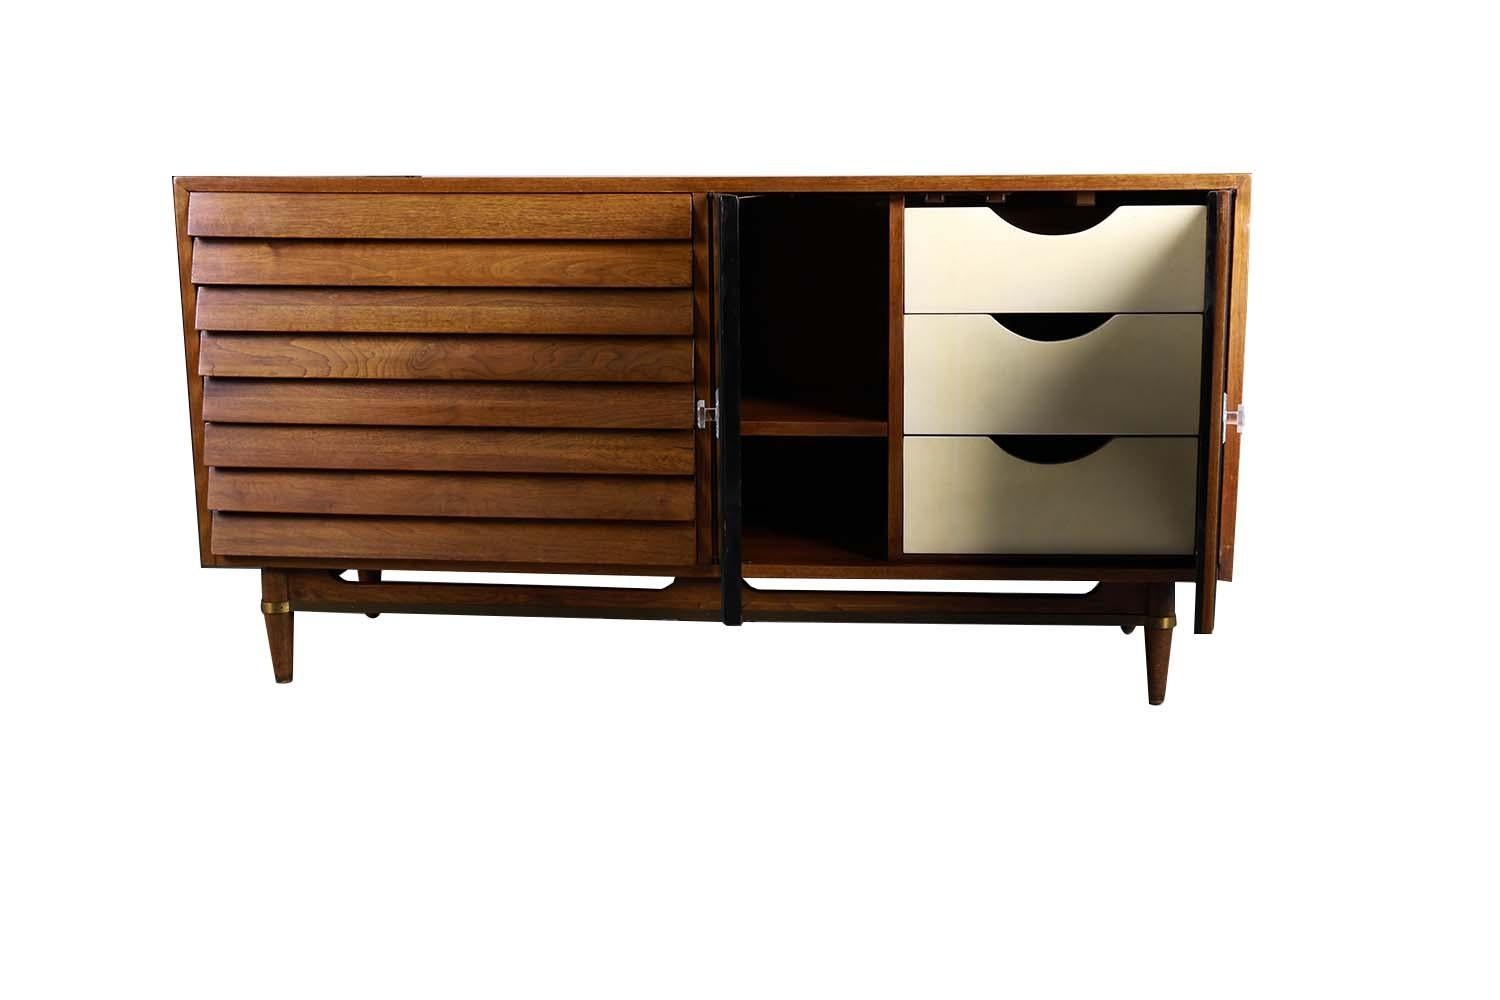 A beautifully detailed proportioned walnut American of Martinsville credenza in great original condition. Designed by Merton Gershun for the “Dania” line featuring rectangular top over a two door mirrored cabinet on the right side, open to reveal